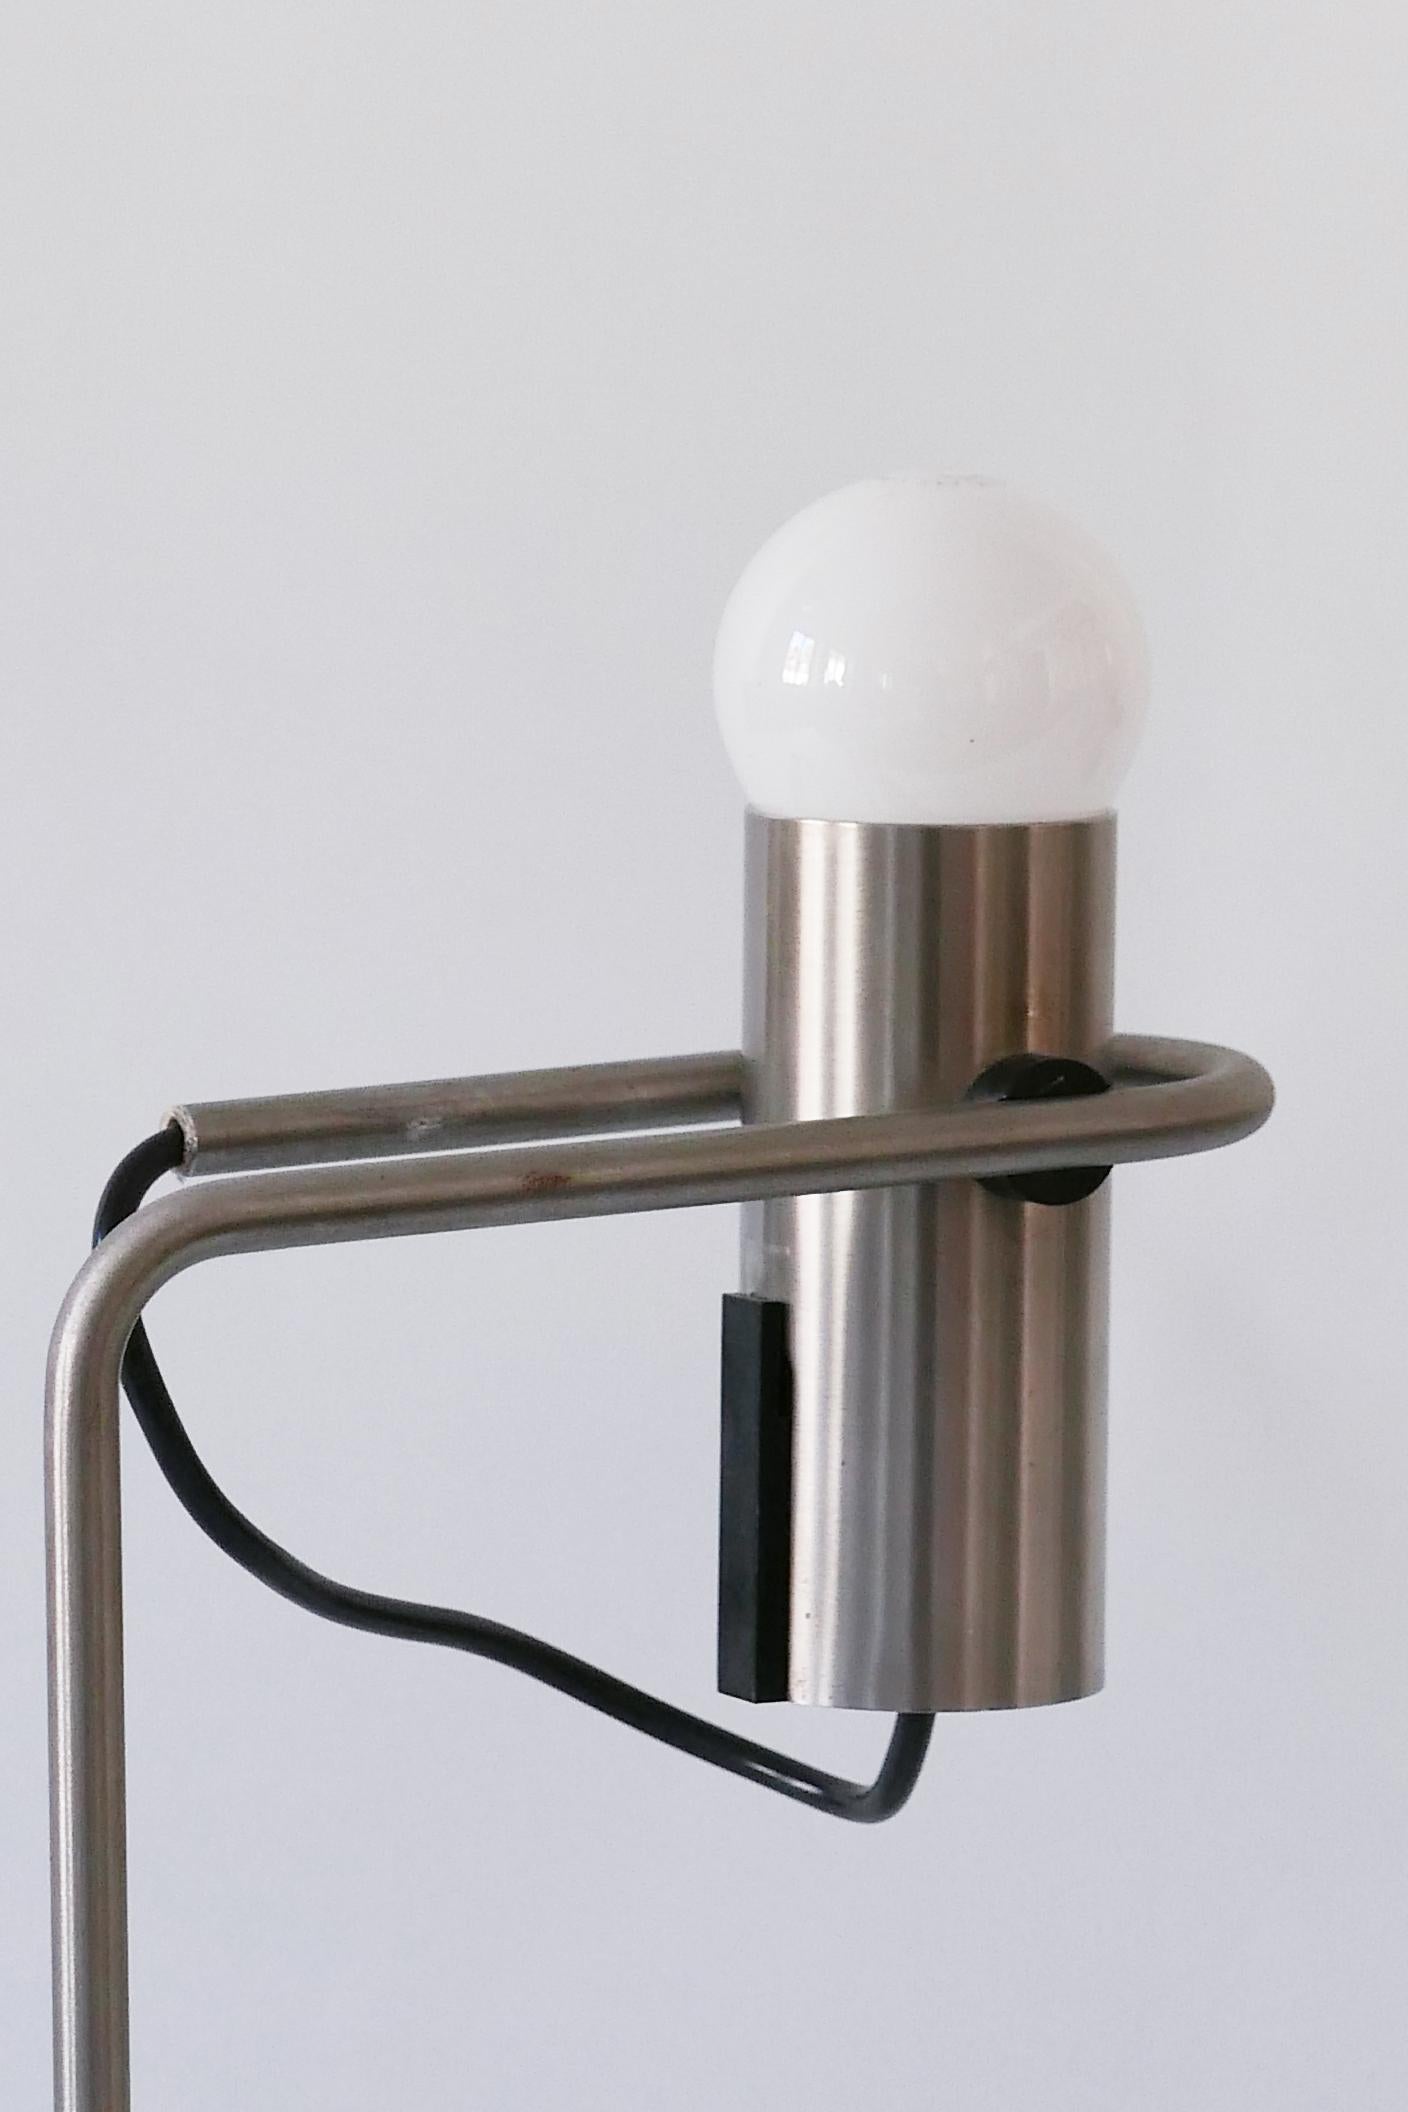 Exceptional Minimalistic Mid-Century Modern Table Lamp or Desk Light, 1960s For Sale 10